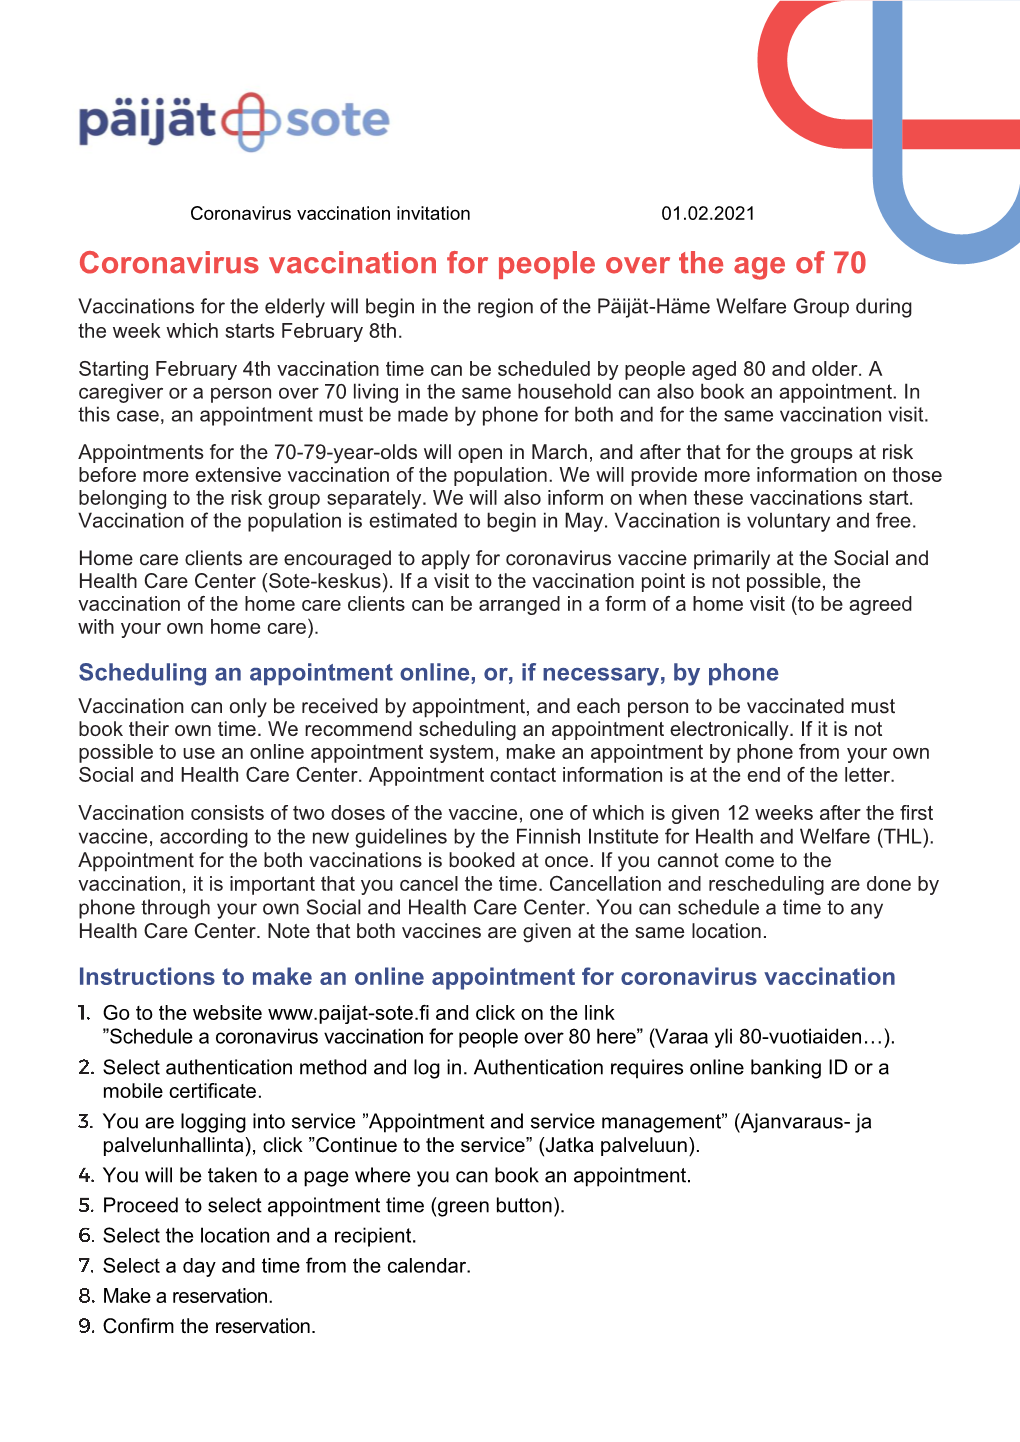 Coronavirus Vaccination for People Over the Age of 70